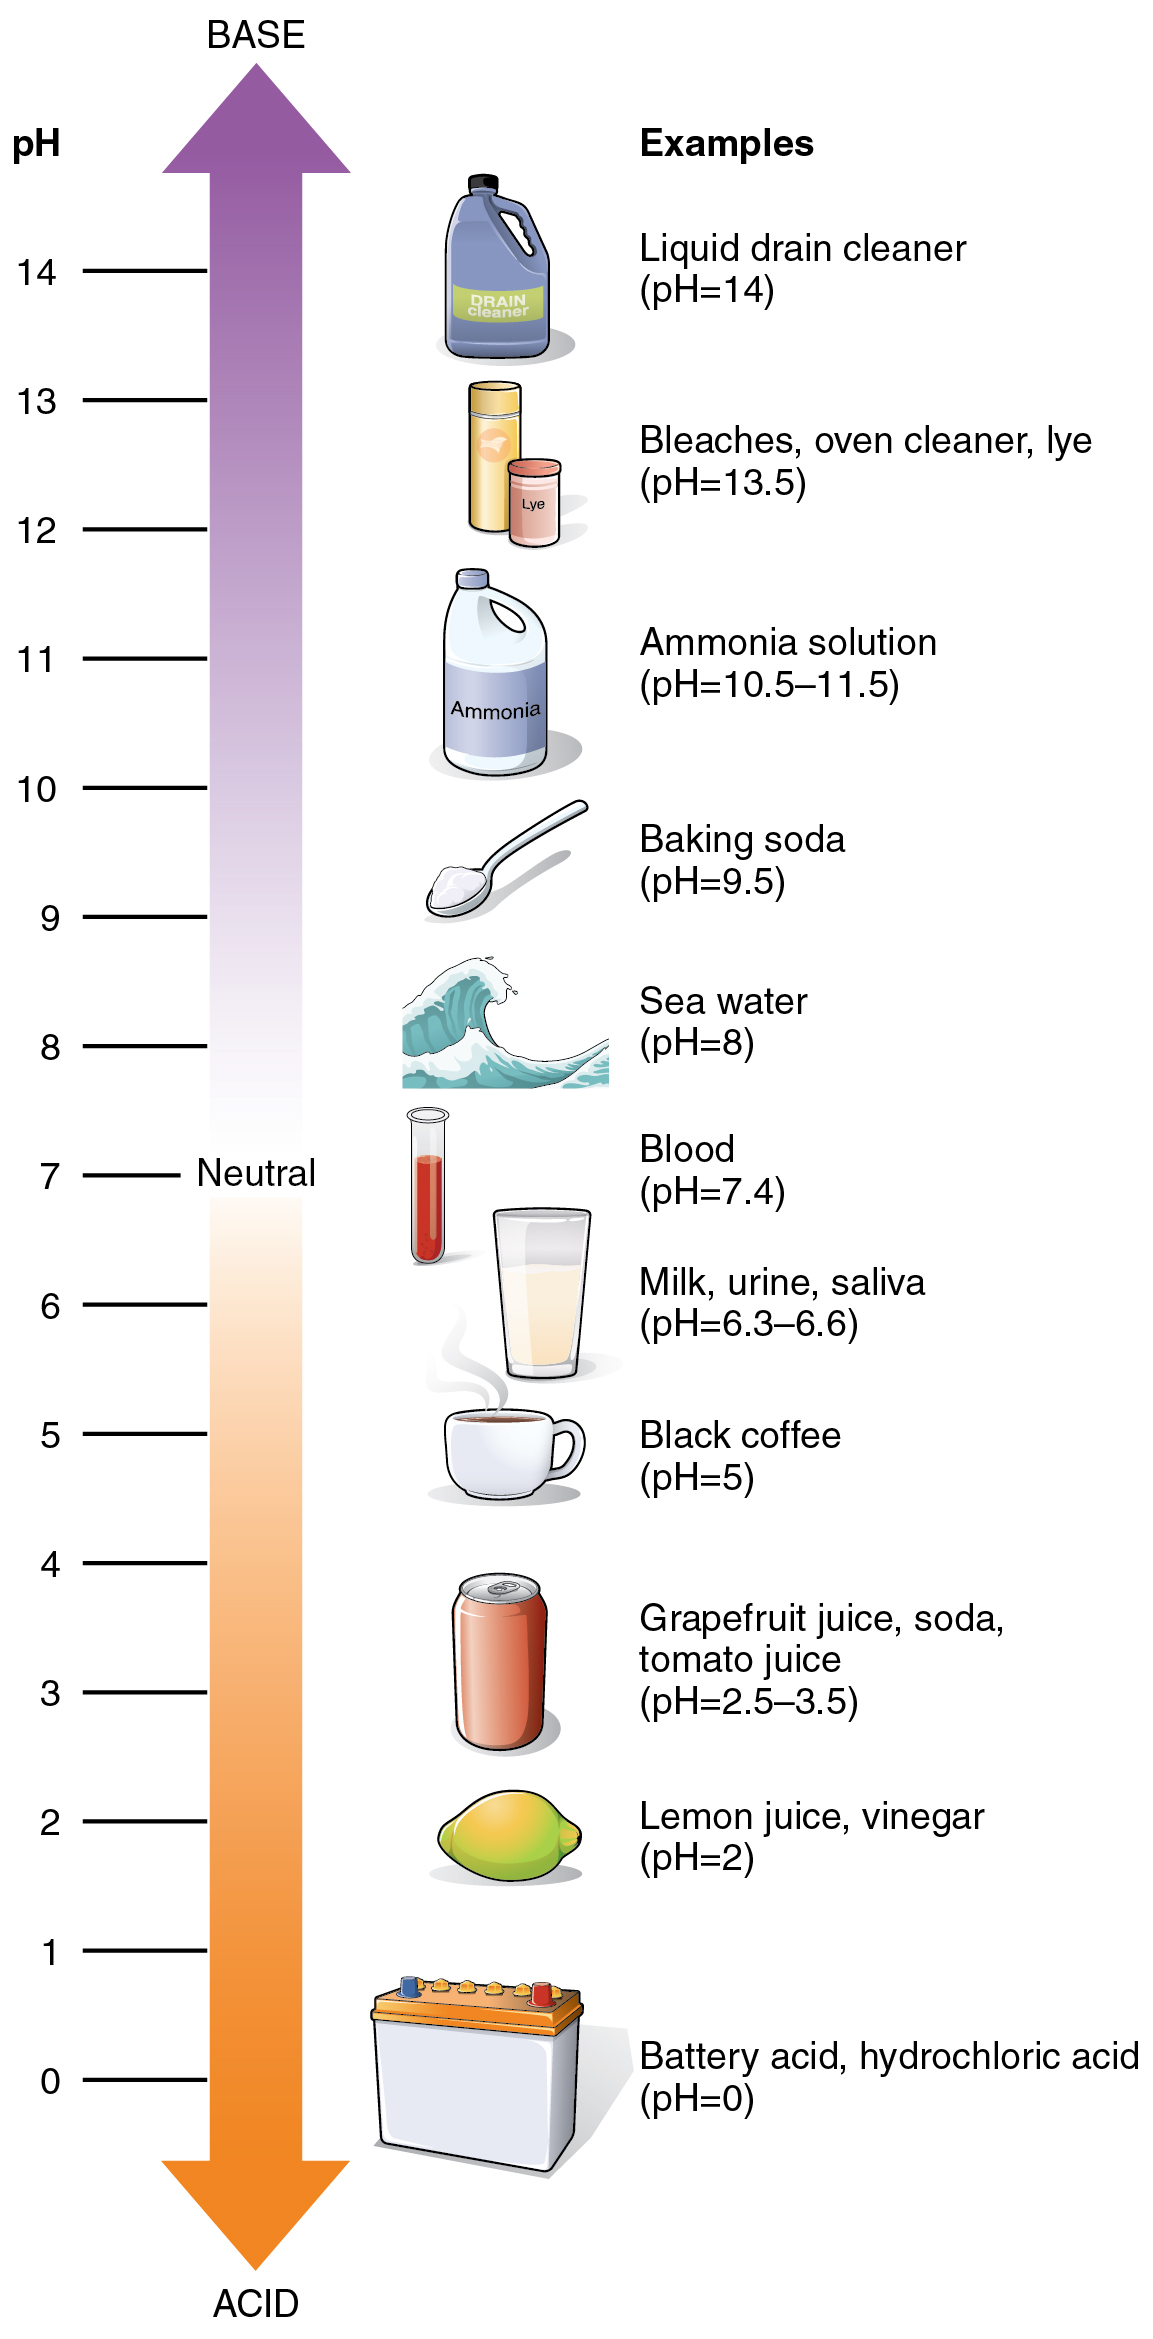 pH scale and examples